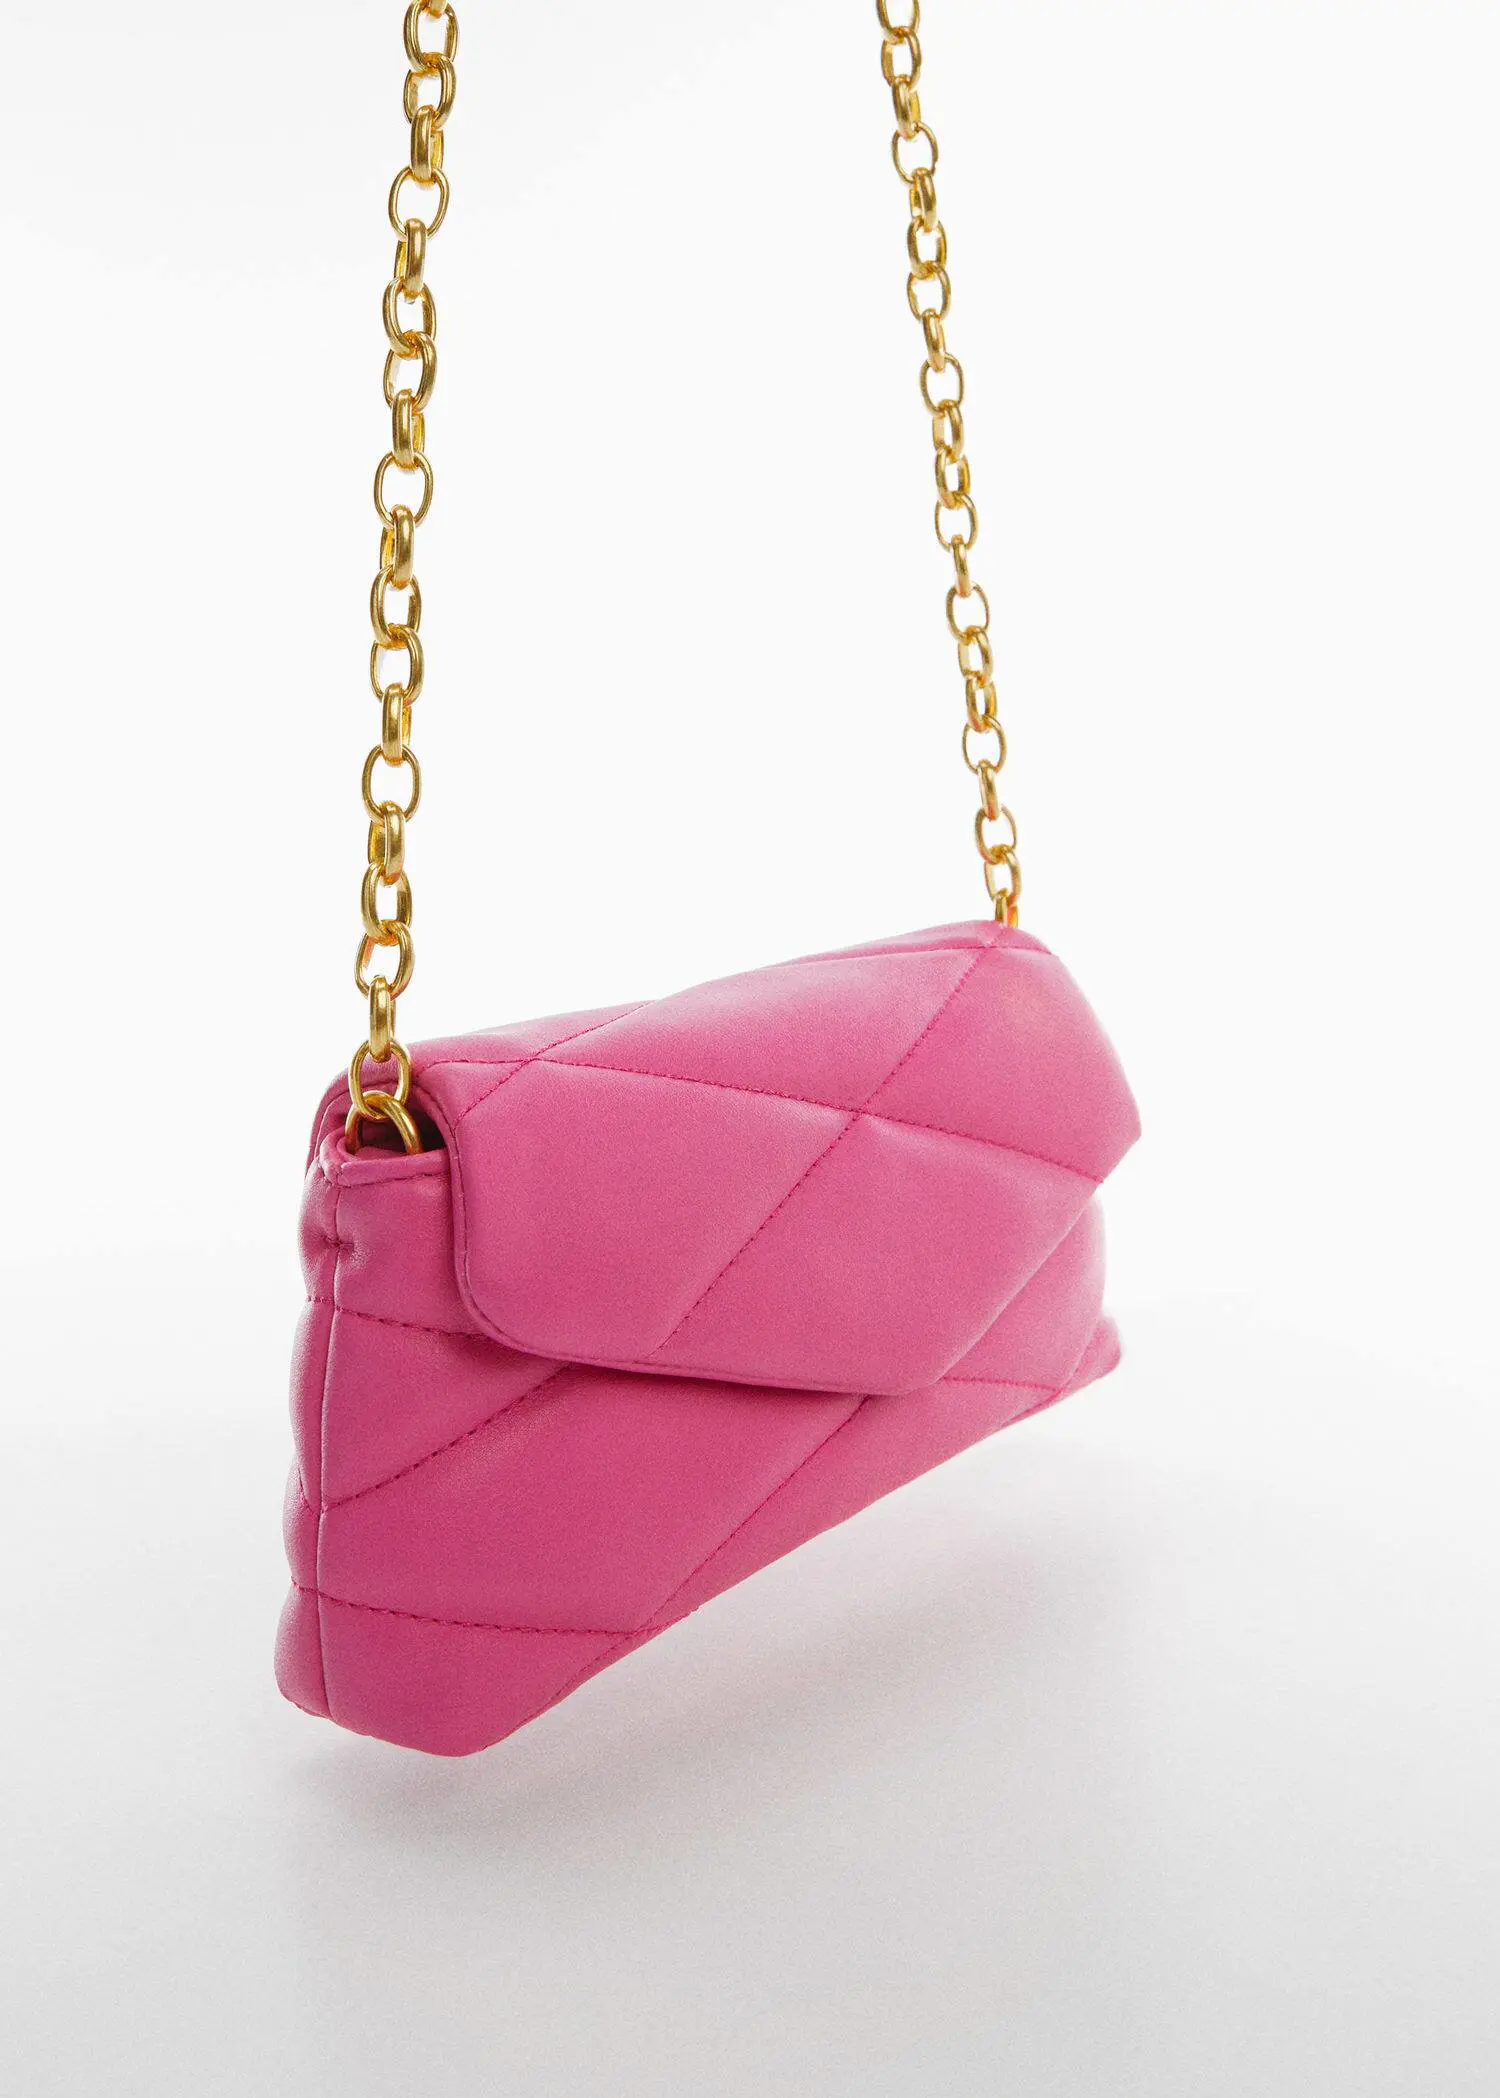 Mango Quilted chain bag. a close up of a pink purse on a white surface 